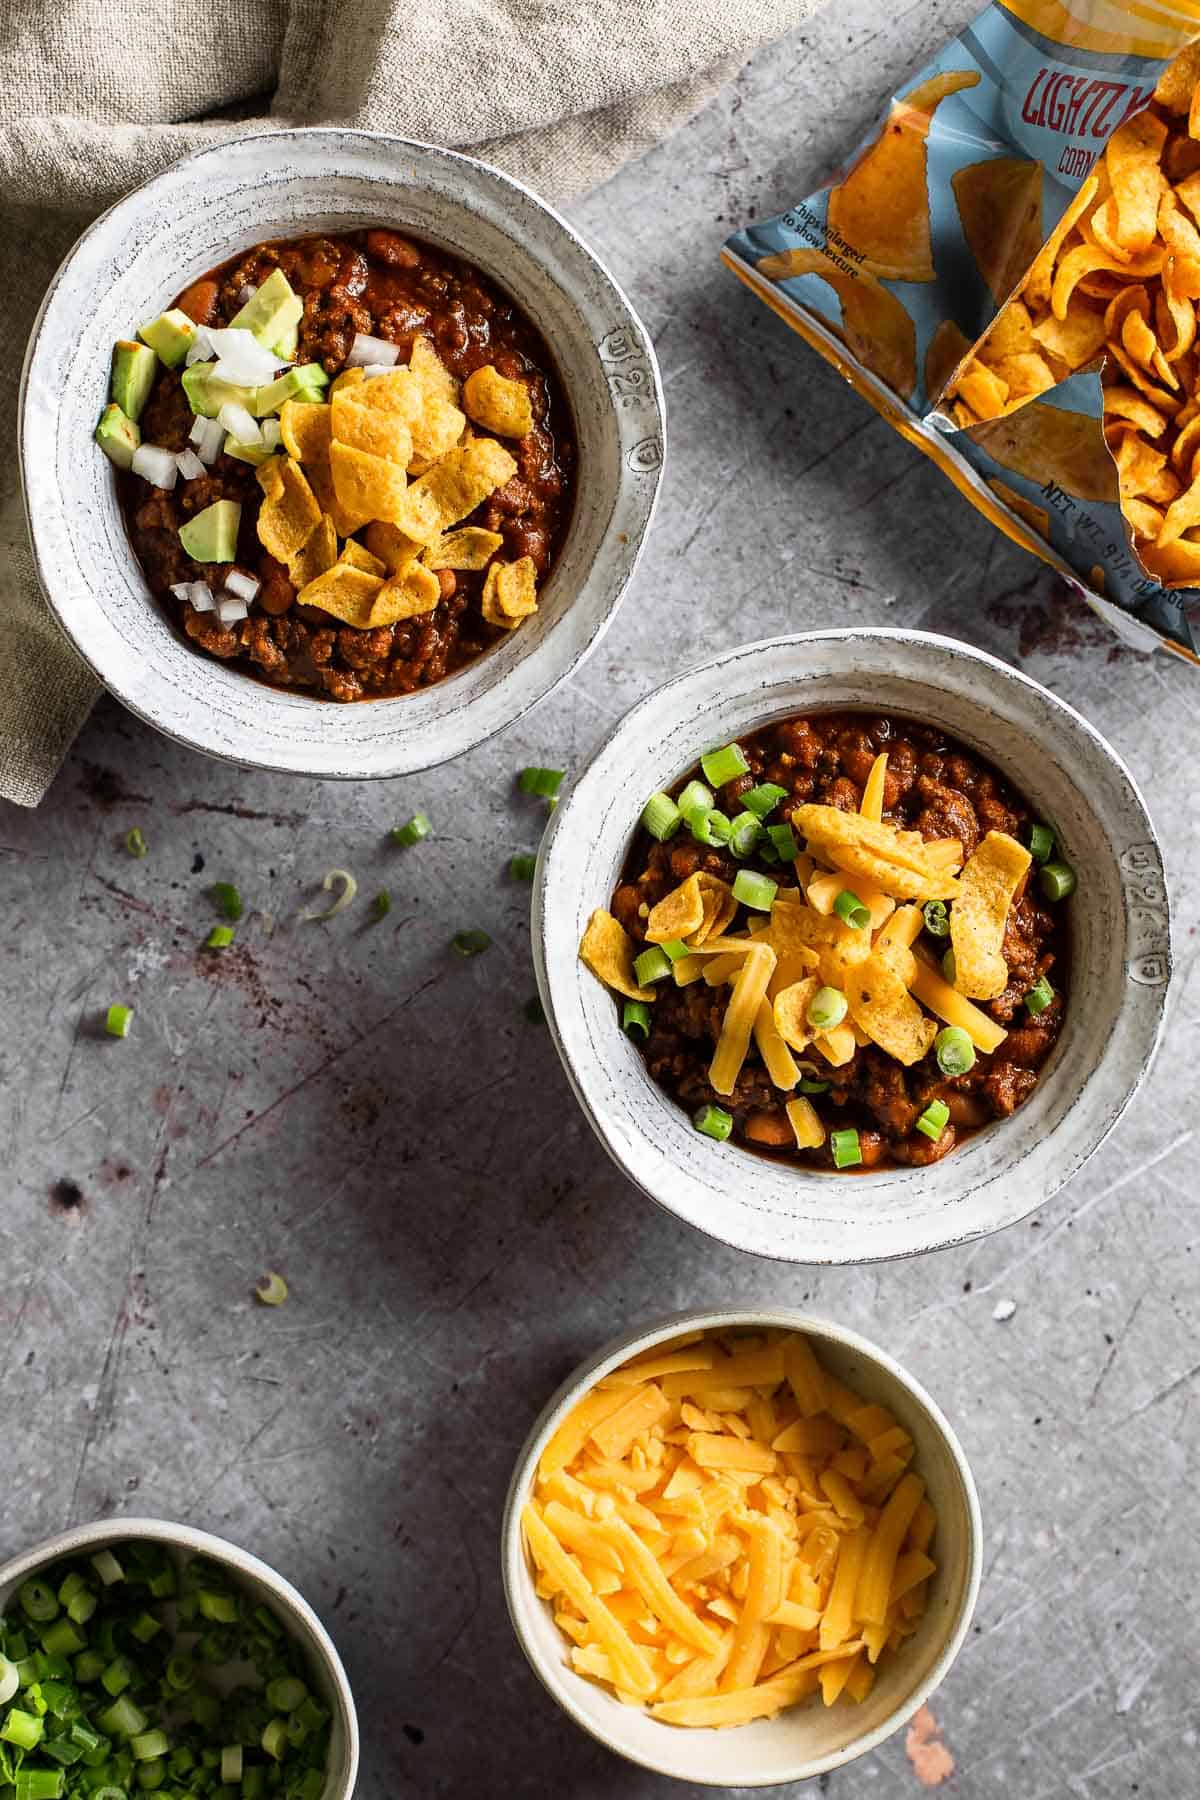 two bowls of chili, a bowl of cheese and an open bag of fritos